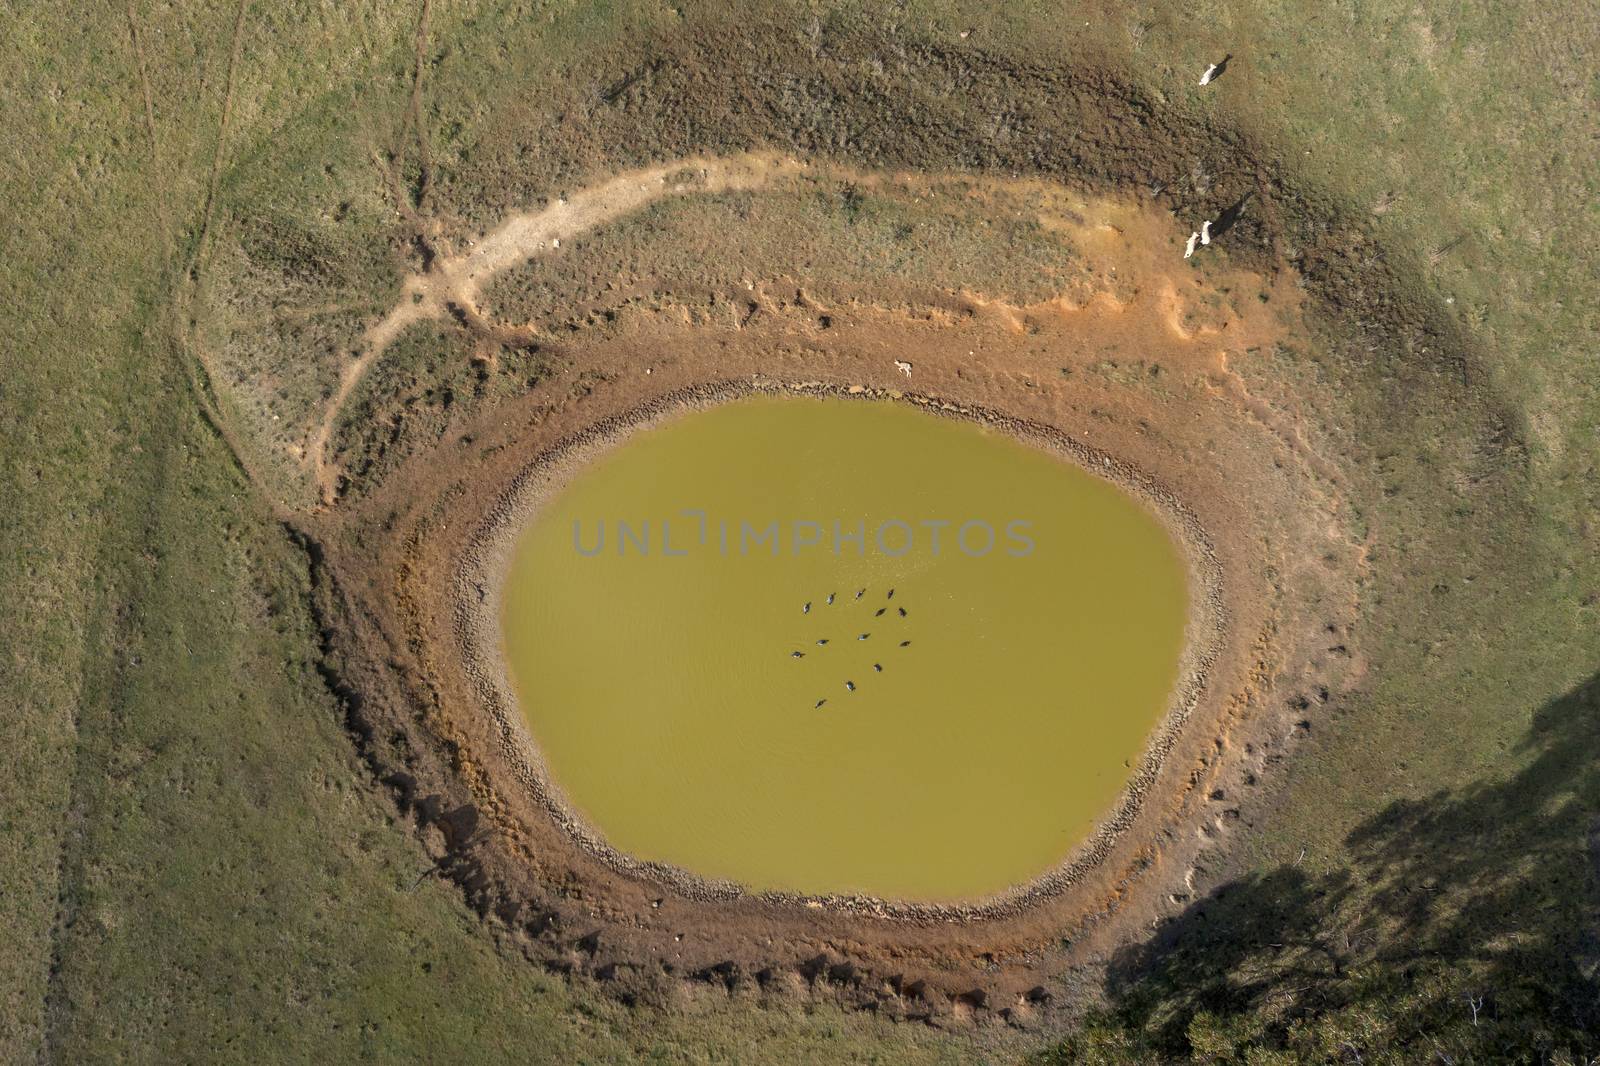 Ducks swimming in a dry agricultural irrigation dam in regional Australia by WittkePhotos